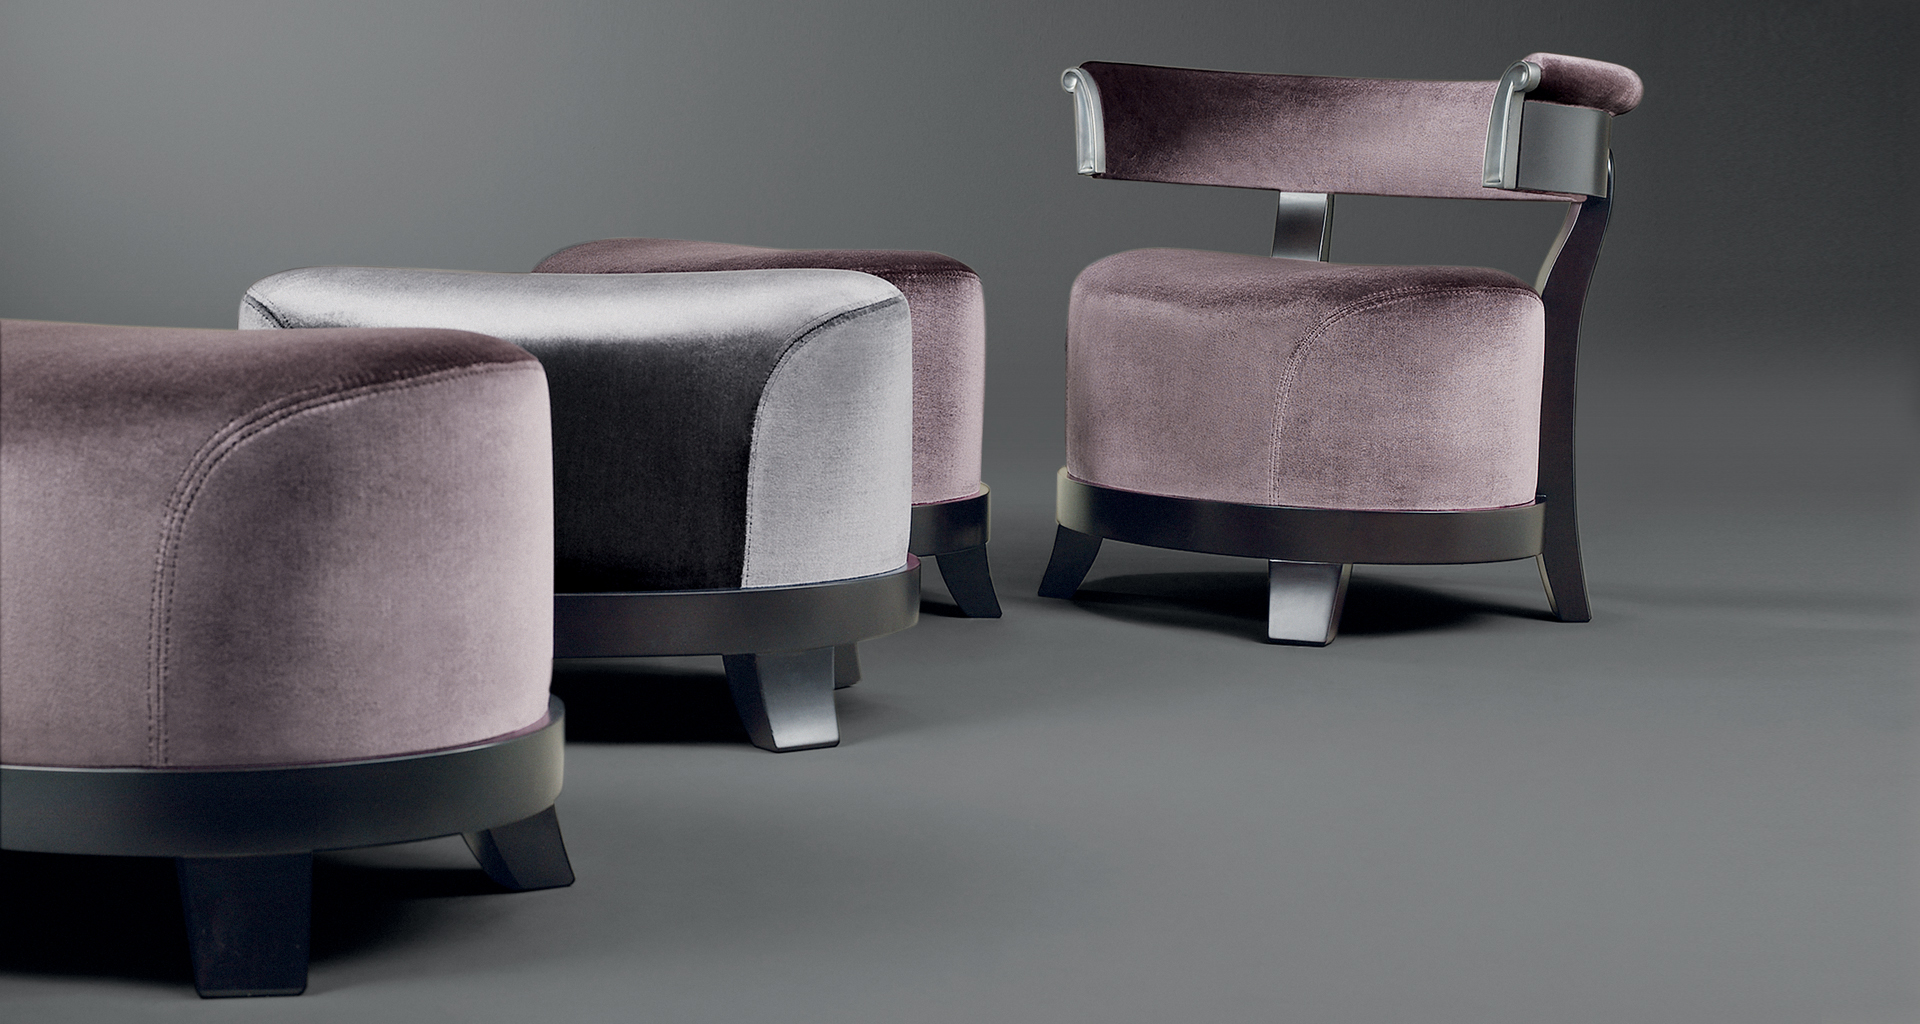 Chelsea is a wooden armchair covered in fabric or leather with bronze details, from Promemoria's catalogue | Promemoria